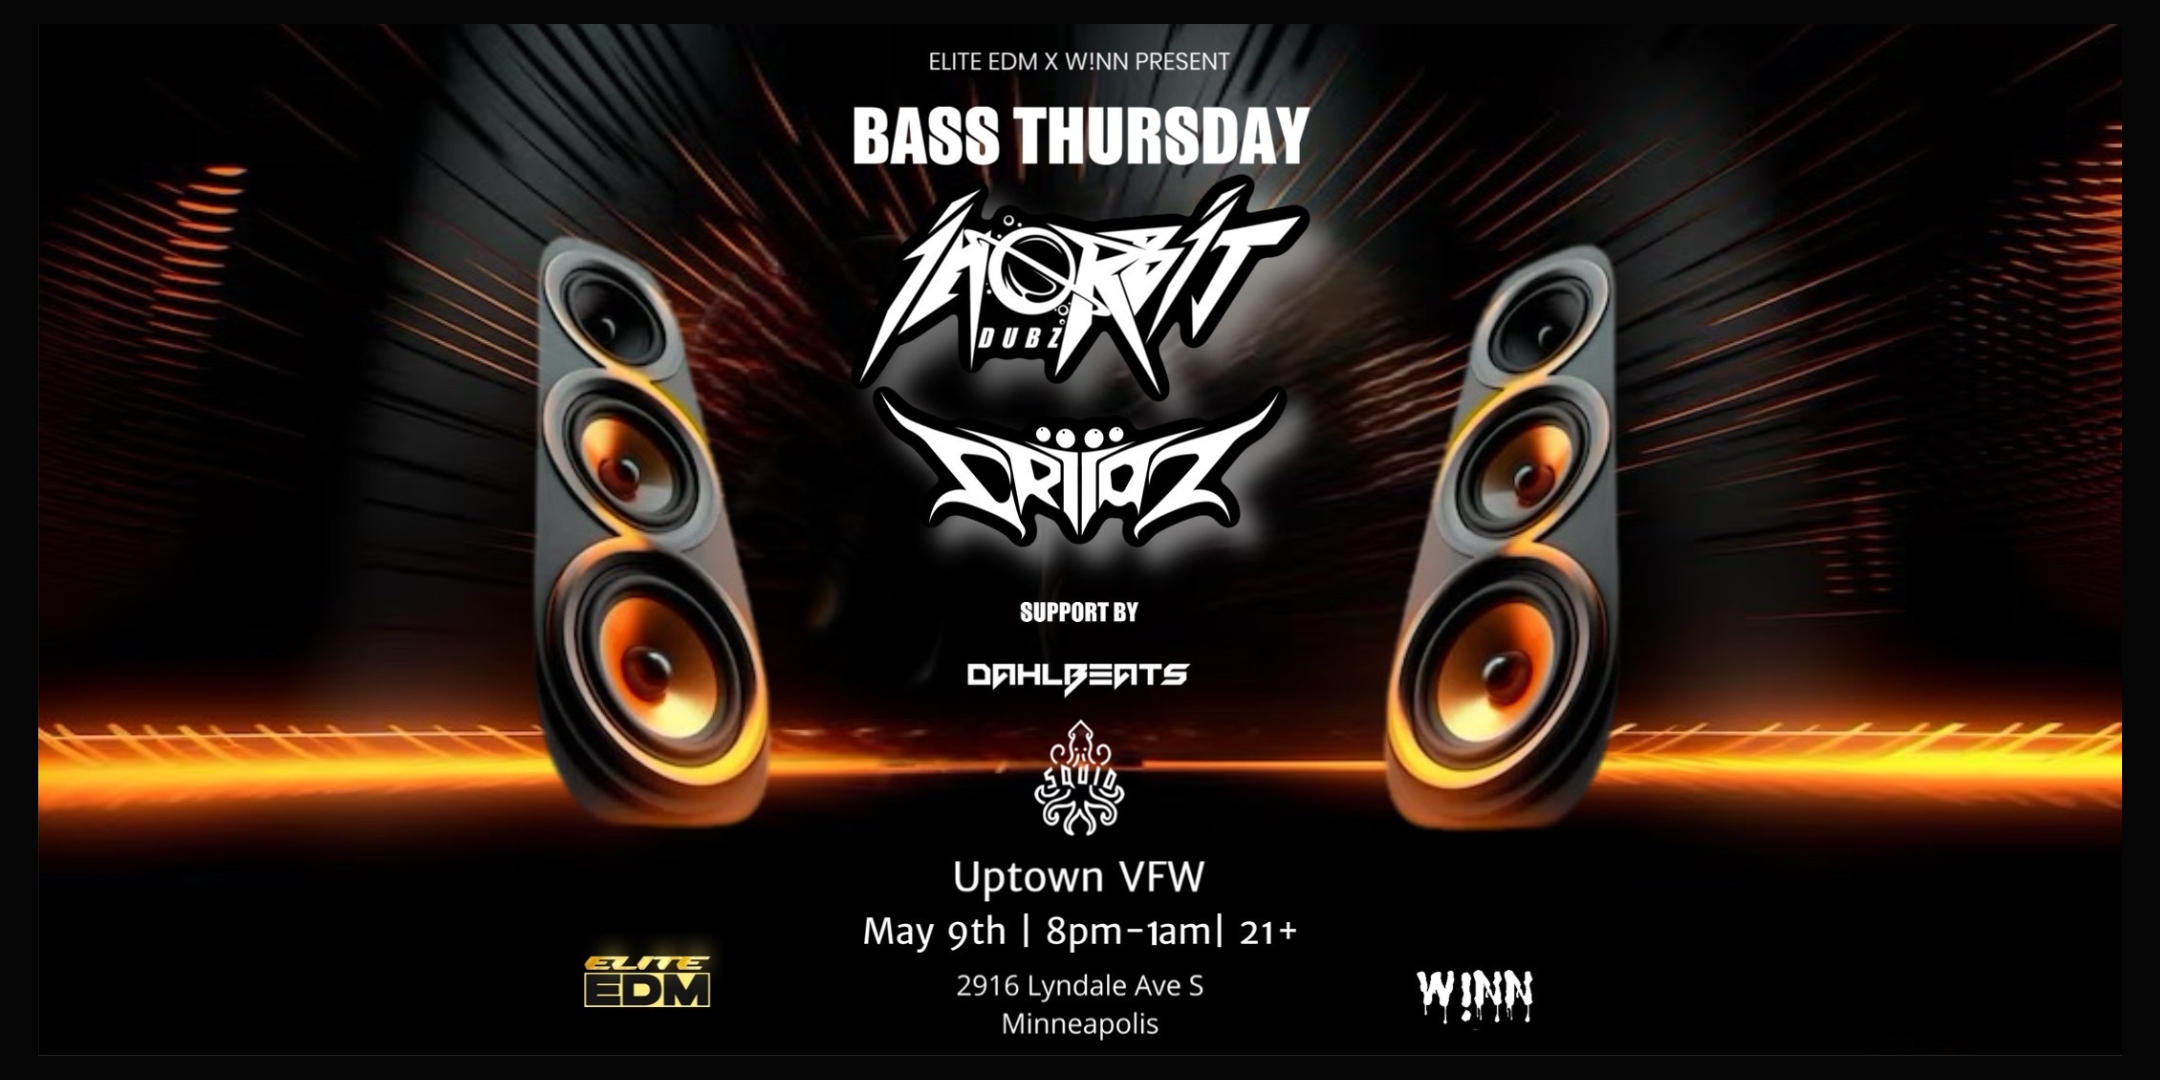 Elite EDM and Winn Presents: In Orbit Dubz | CRiiOZ (CRiiOZ Minneapolis debut) Support by: Dahlbeats & SQUiD Thursday May 9 James Ballentine “Uptown” VFW Post 246 Doors 8:00pm :: Music 8pm-1am :: 21+ GA $15 ADV / $20 DOS Tickets On Sale Now